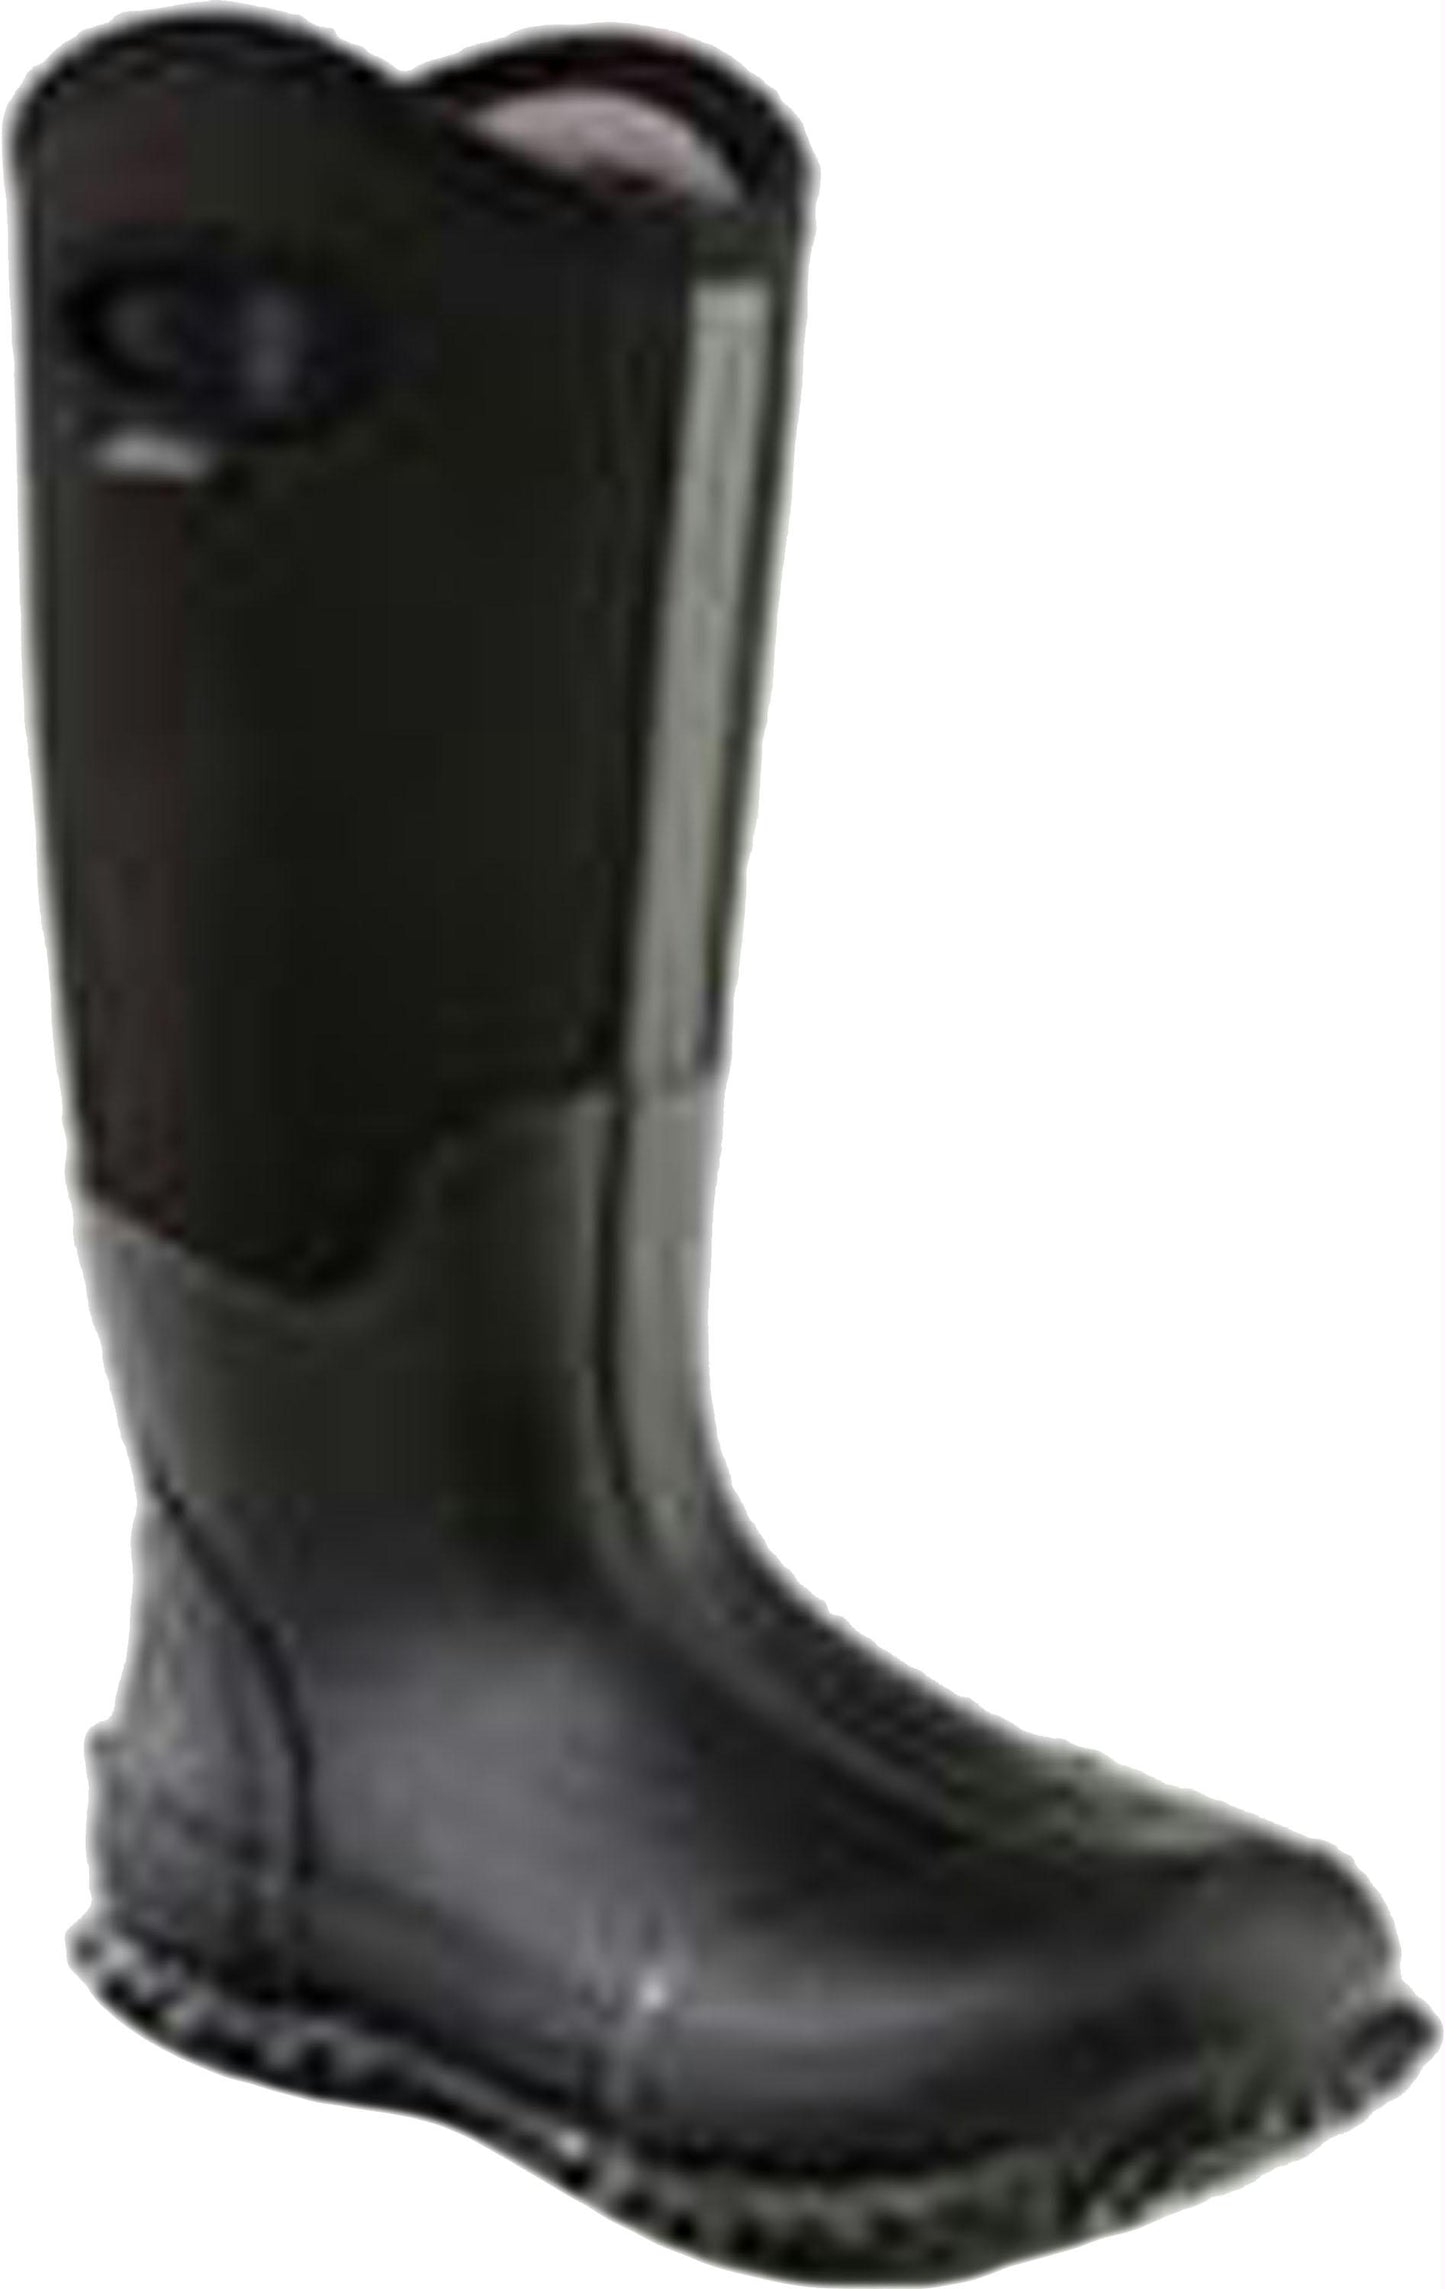 Womens Mudonna High Boot - aomega-products